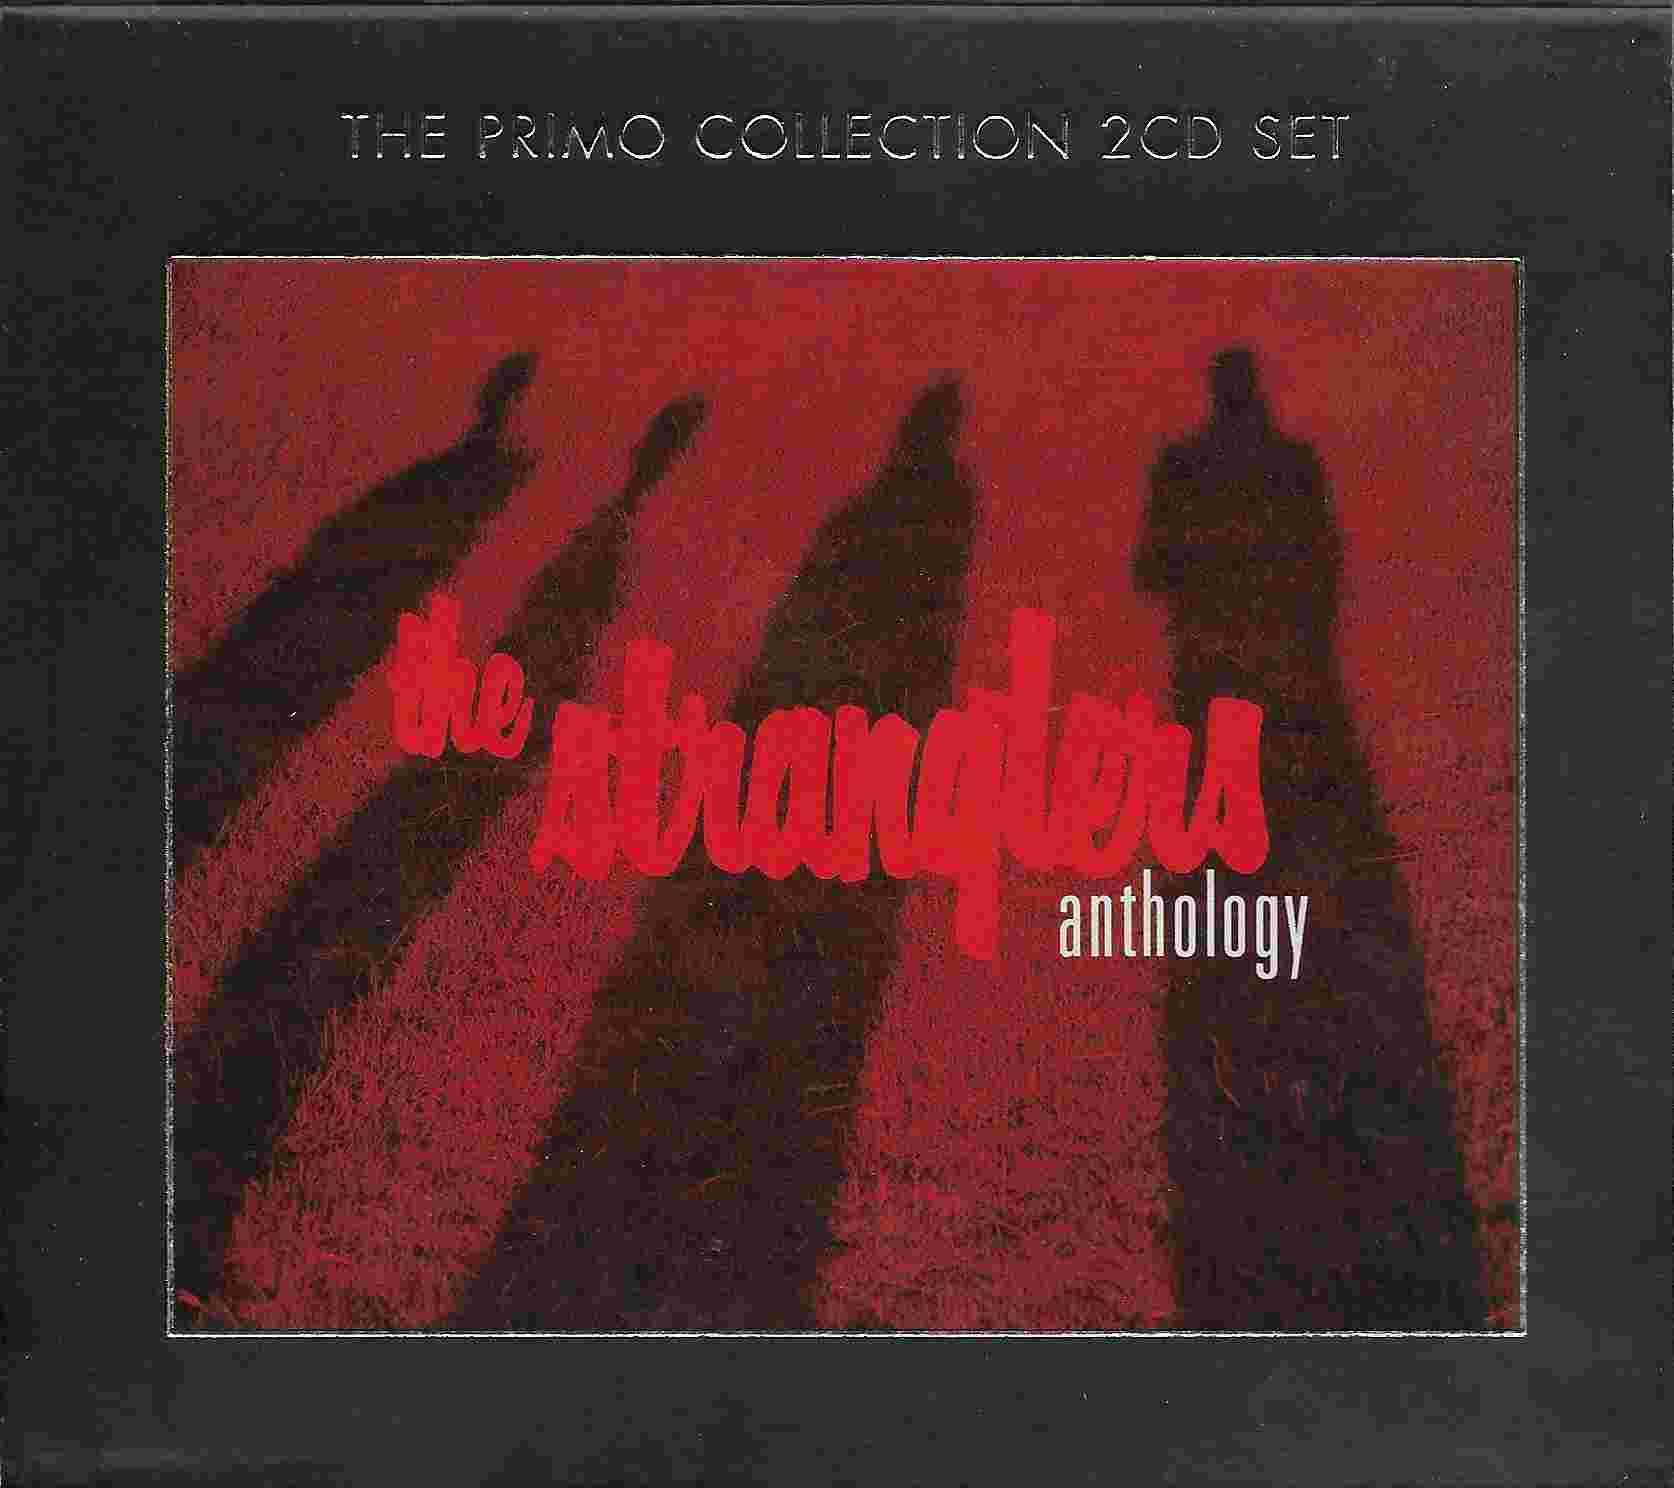 Picture of PRMCD 2004 Anthology by artist The Stranglers